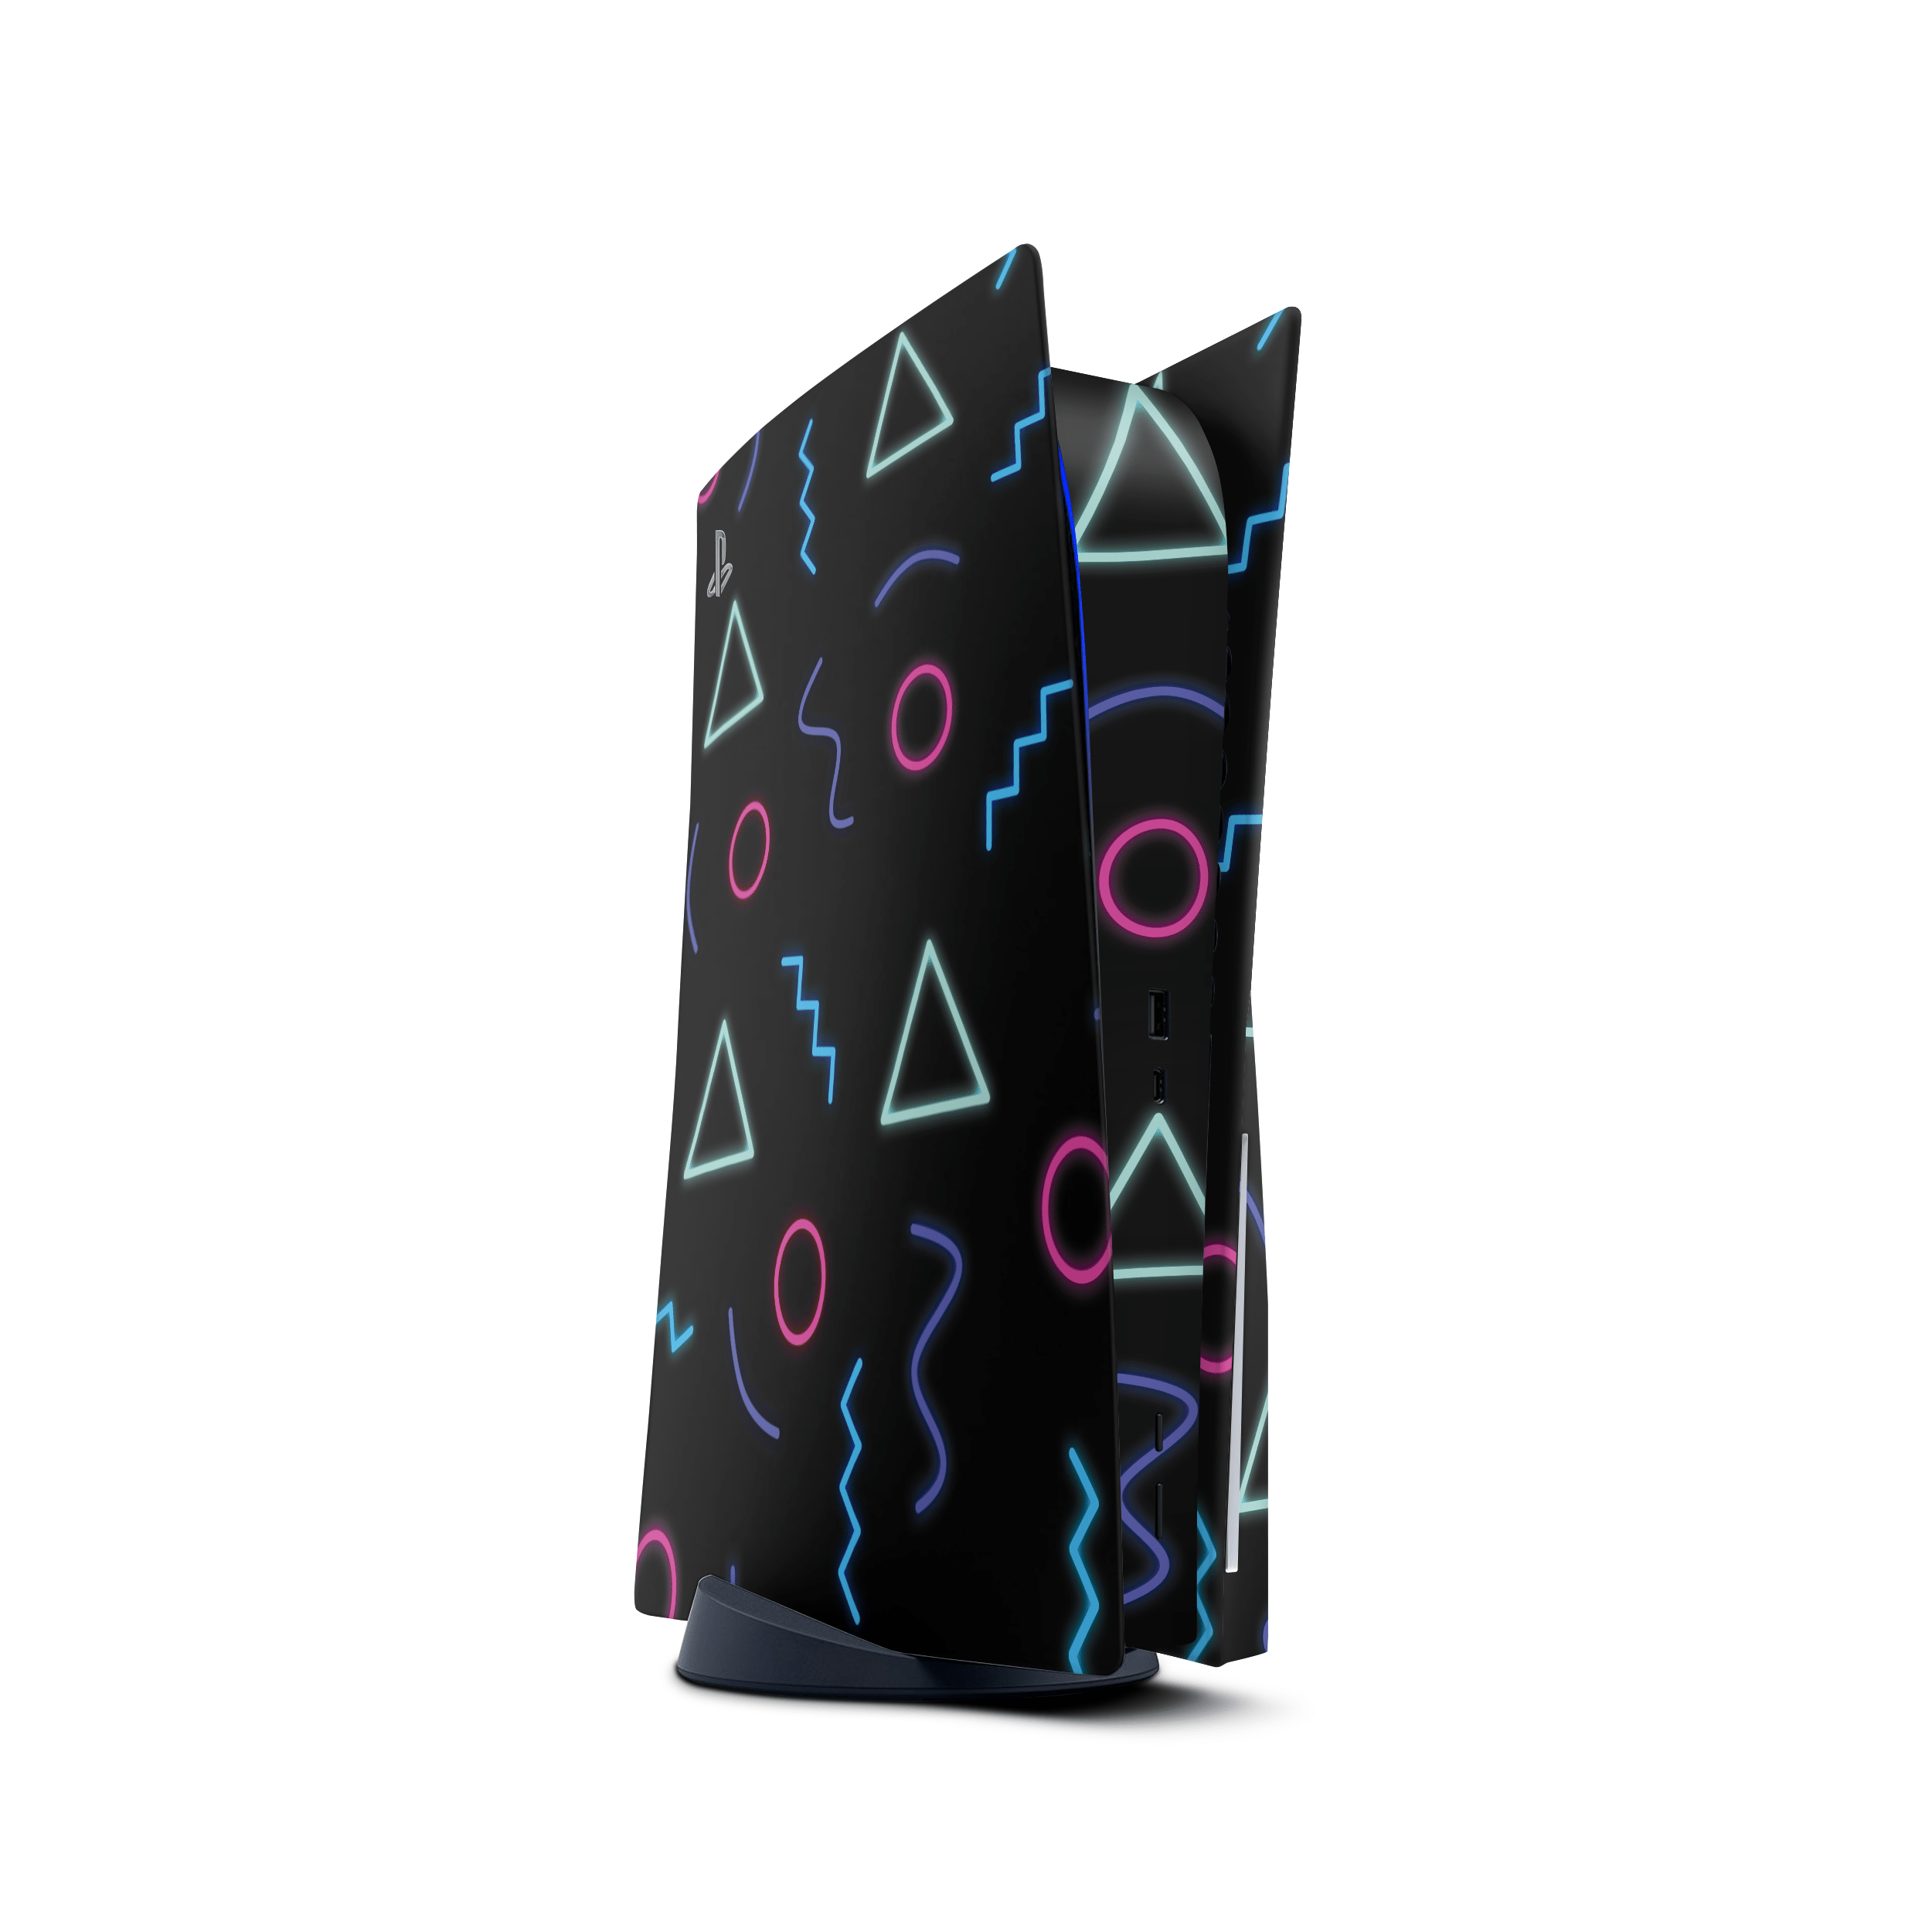 Cool Electric PS5 Skins